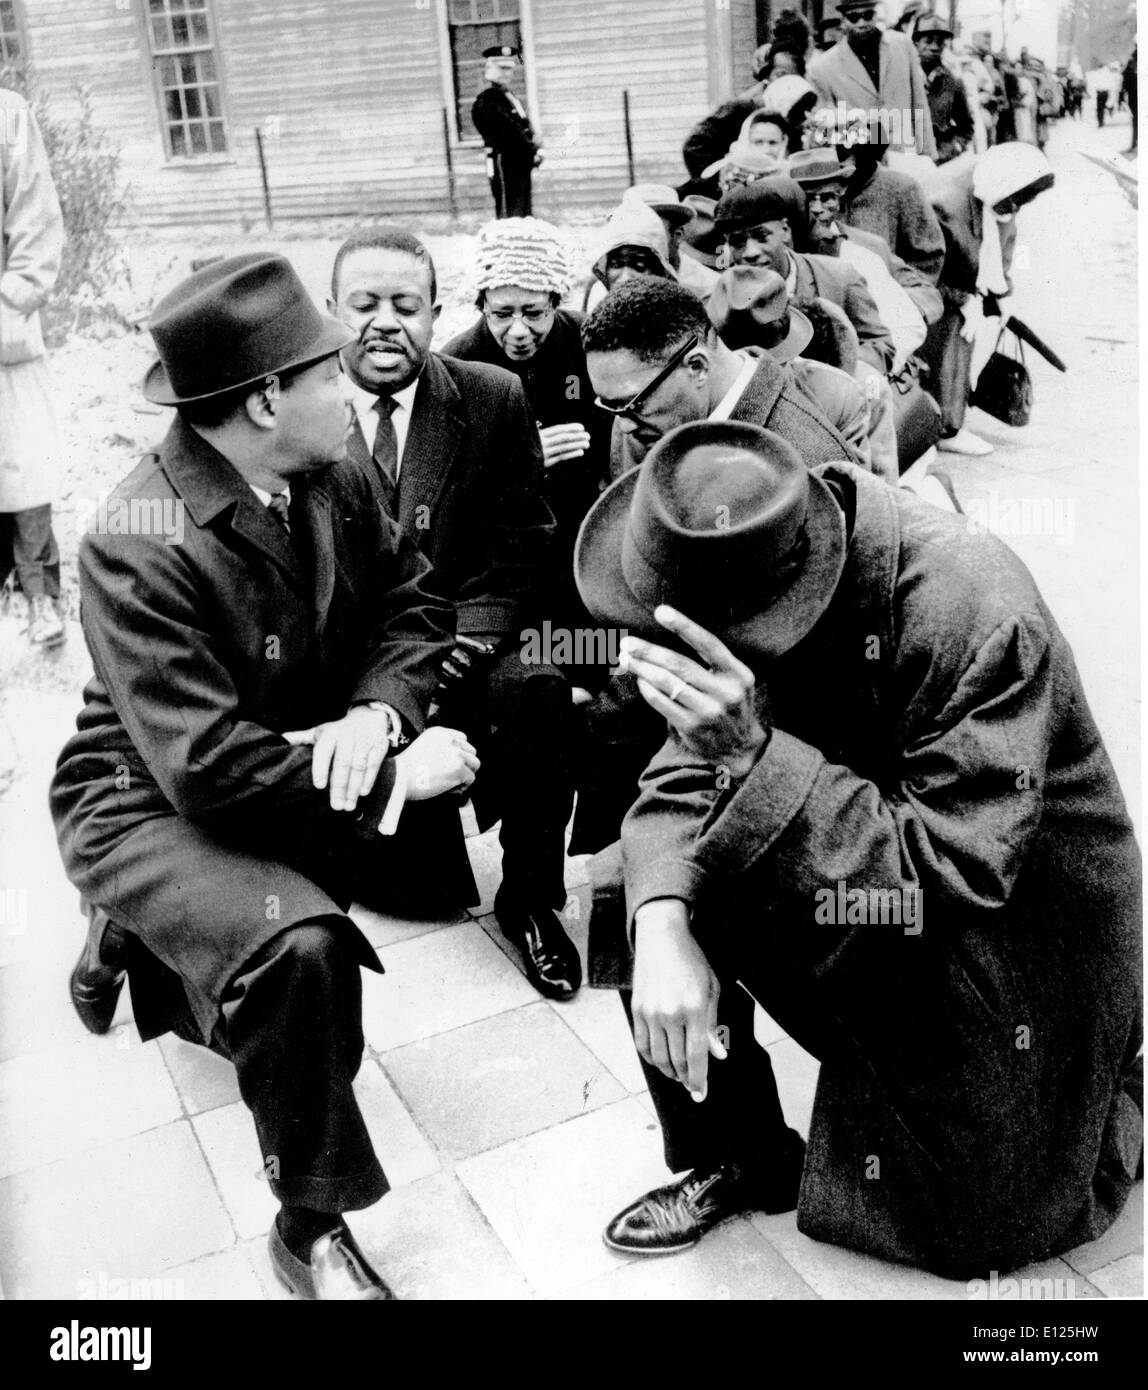 Jan 04, 2005; Atlanta, GA, USA; (File Photo. Date Unknown) MARTIN LUTHER KING, JR. (L) leads African-Americans in the 'March to Stock Photo